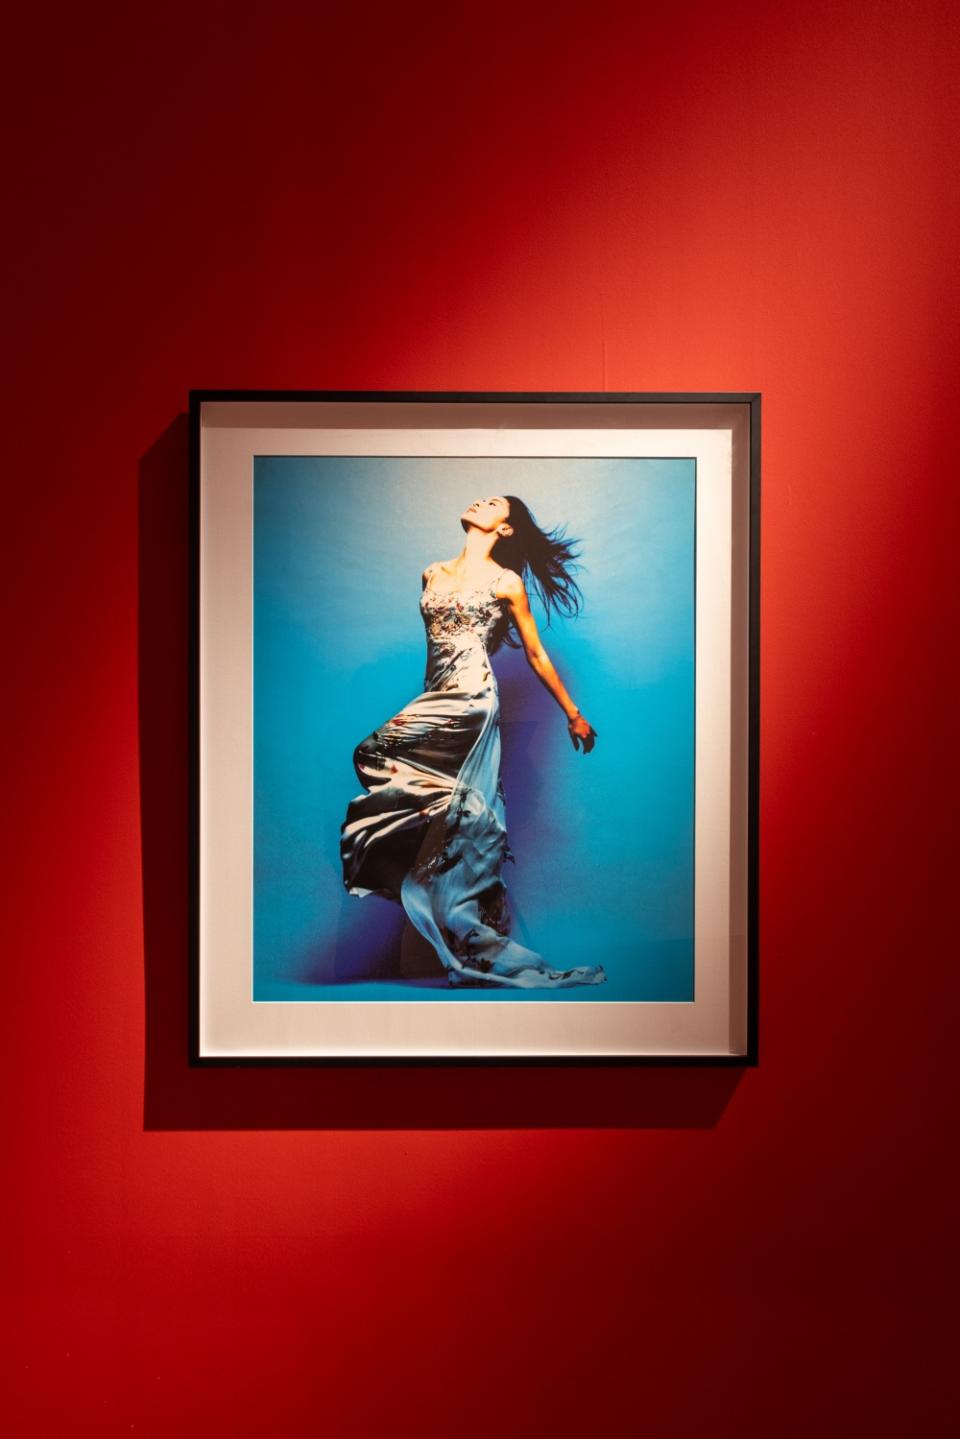 Michelle in motion: A portrait of Yeoh captured by Russell Wong is featured at the exhibition. — Picture courtesy of Marina Bay Sands